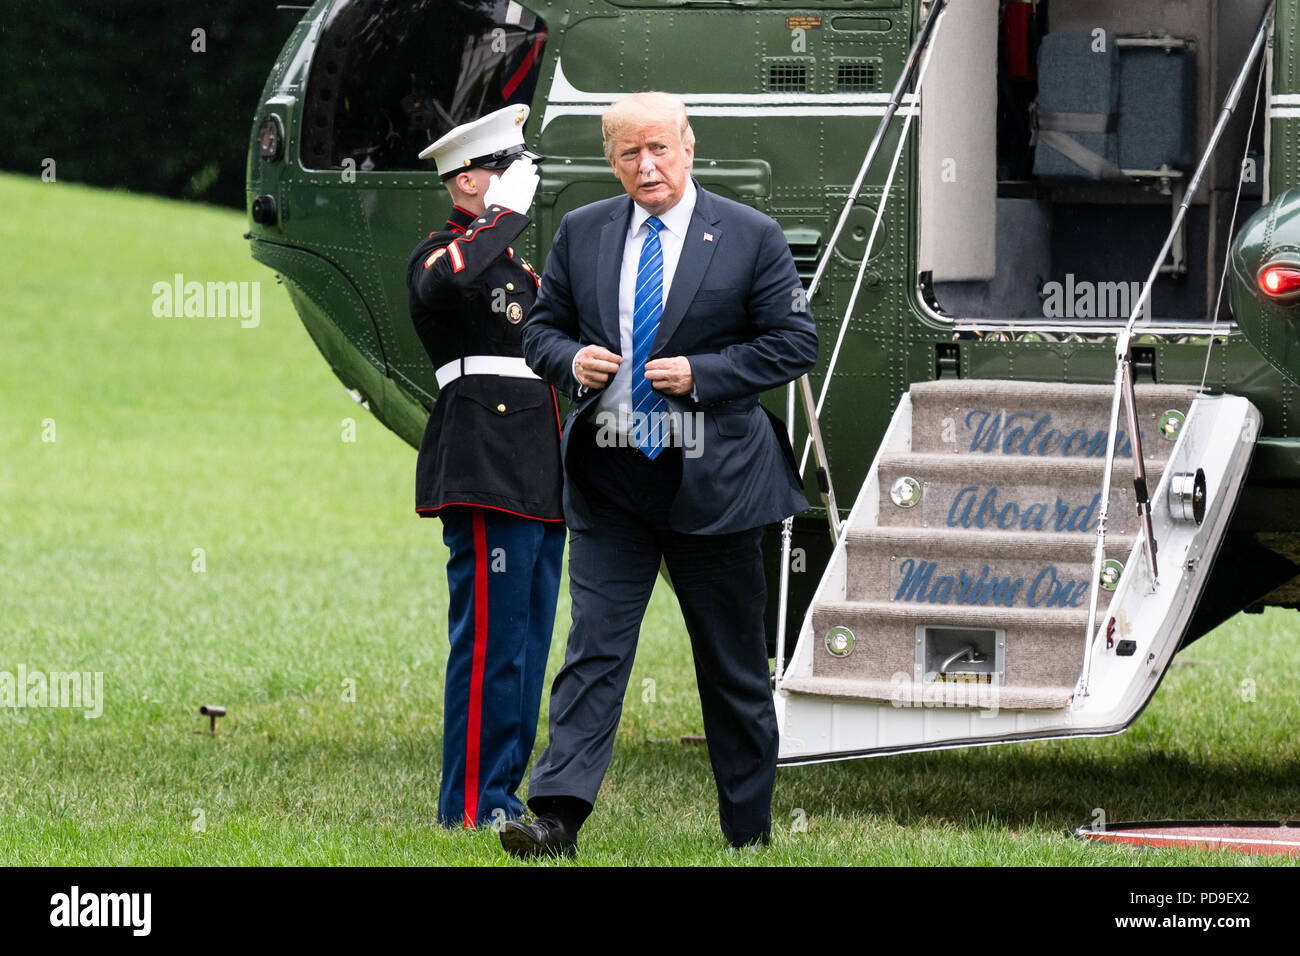 The return of President Donald Trump in the evening via the Marine One helicopter to the White House in Washington, DC on July 24, 2018 Stock Photo